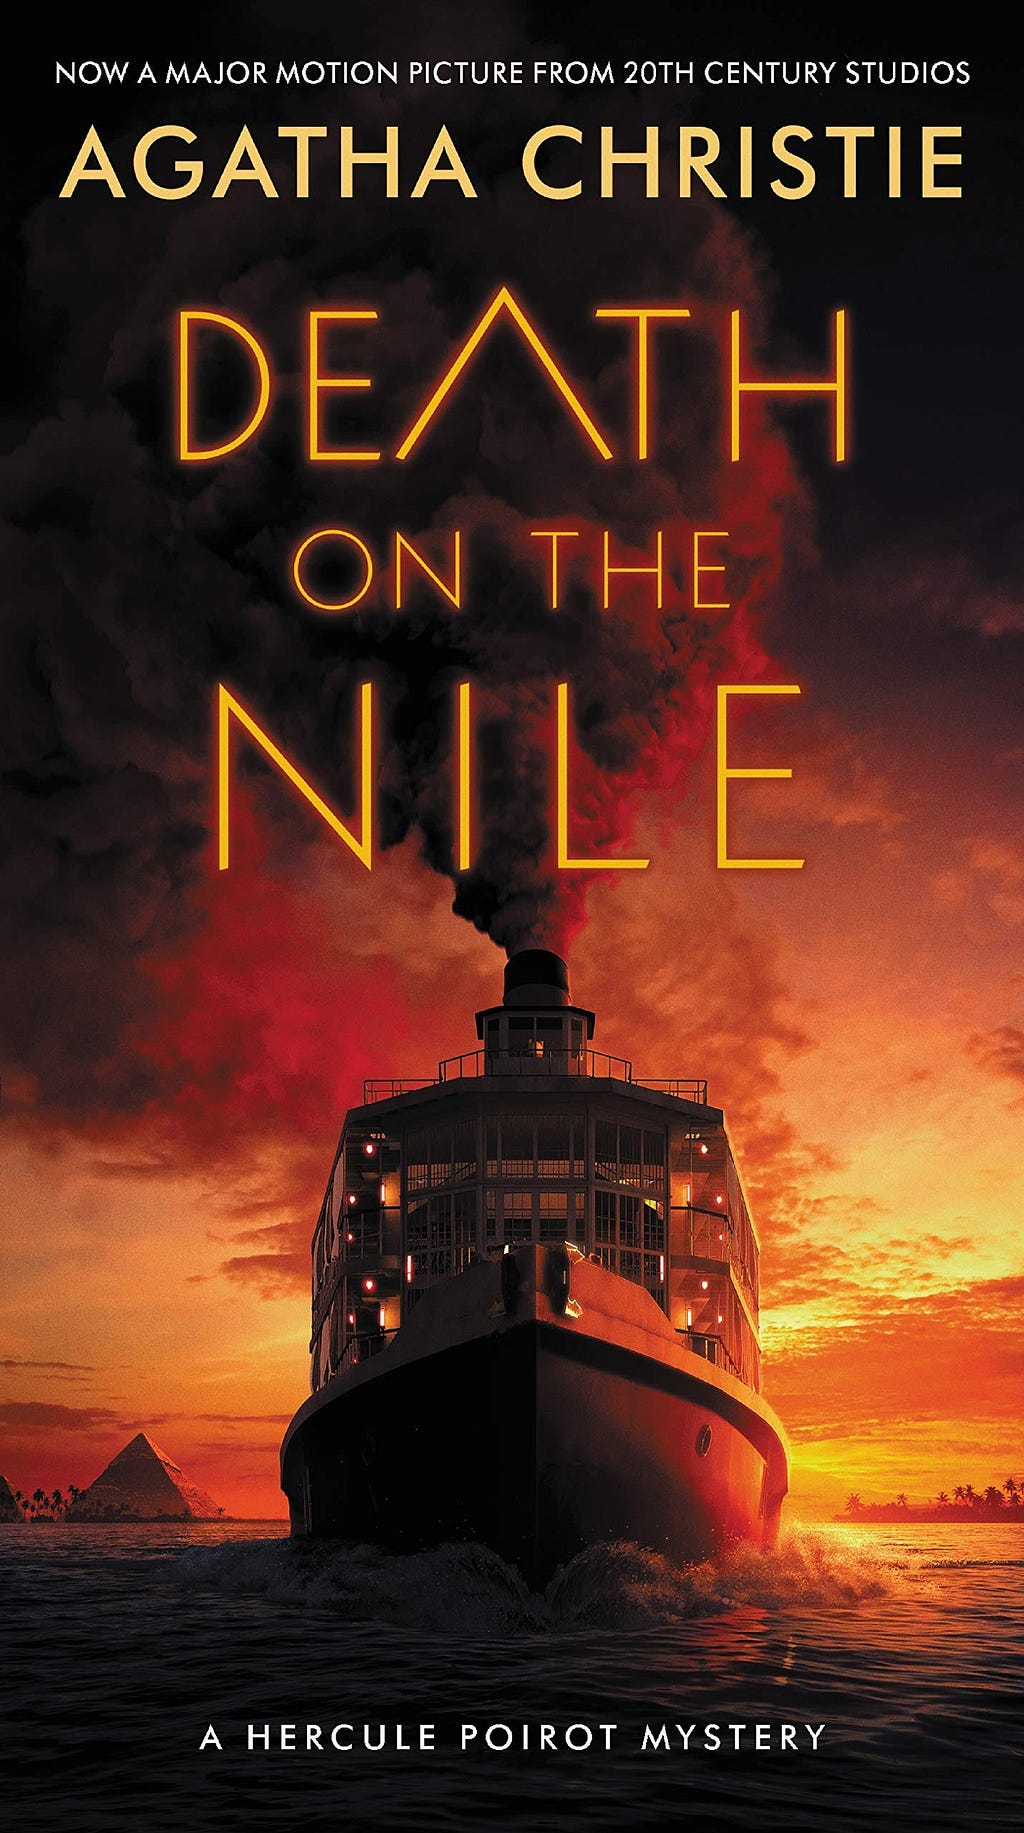 The cover of Death on the Nile by Agaht Christie is primarily gold, orange and black. A cruise ship looms ominously as if heading towards the viewer.